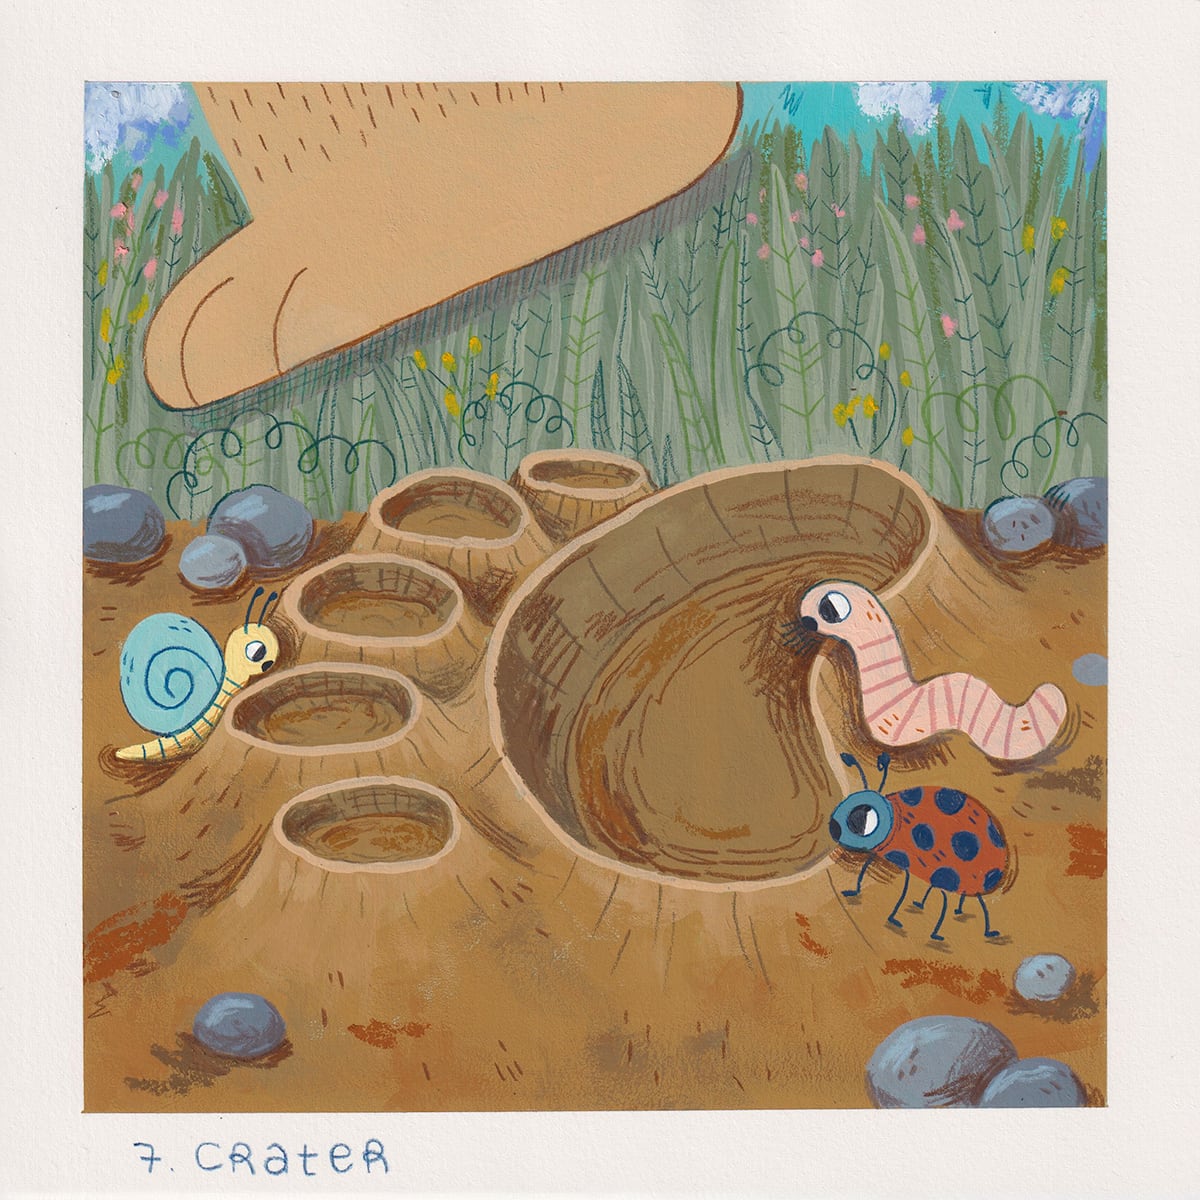 DAY 7 - Crater